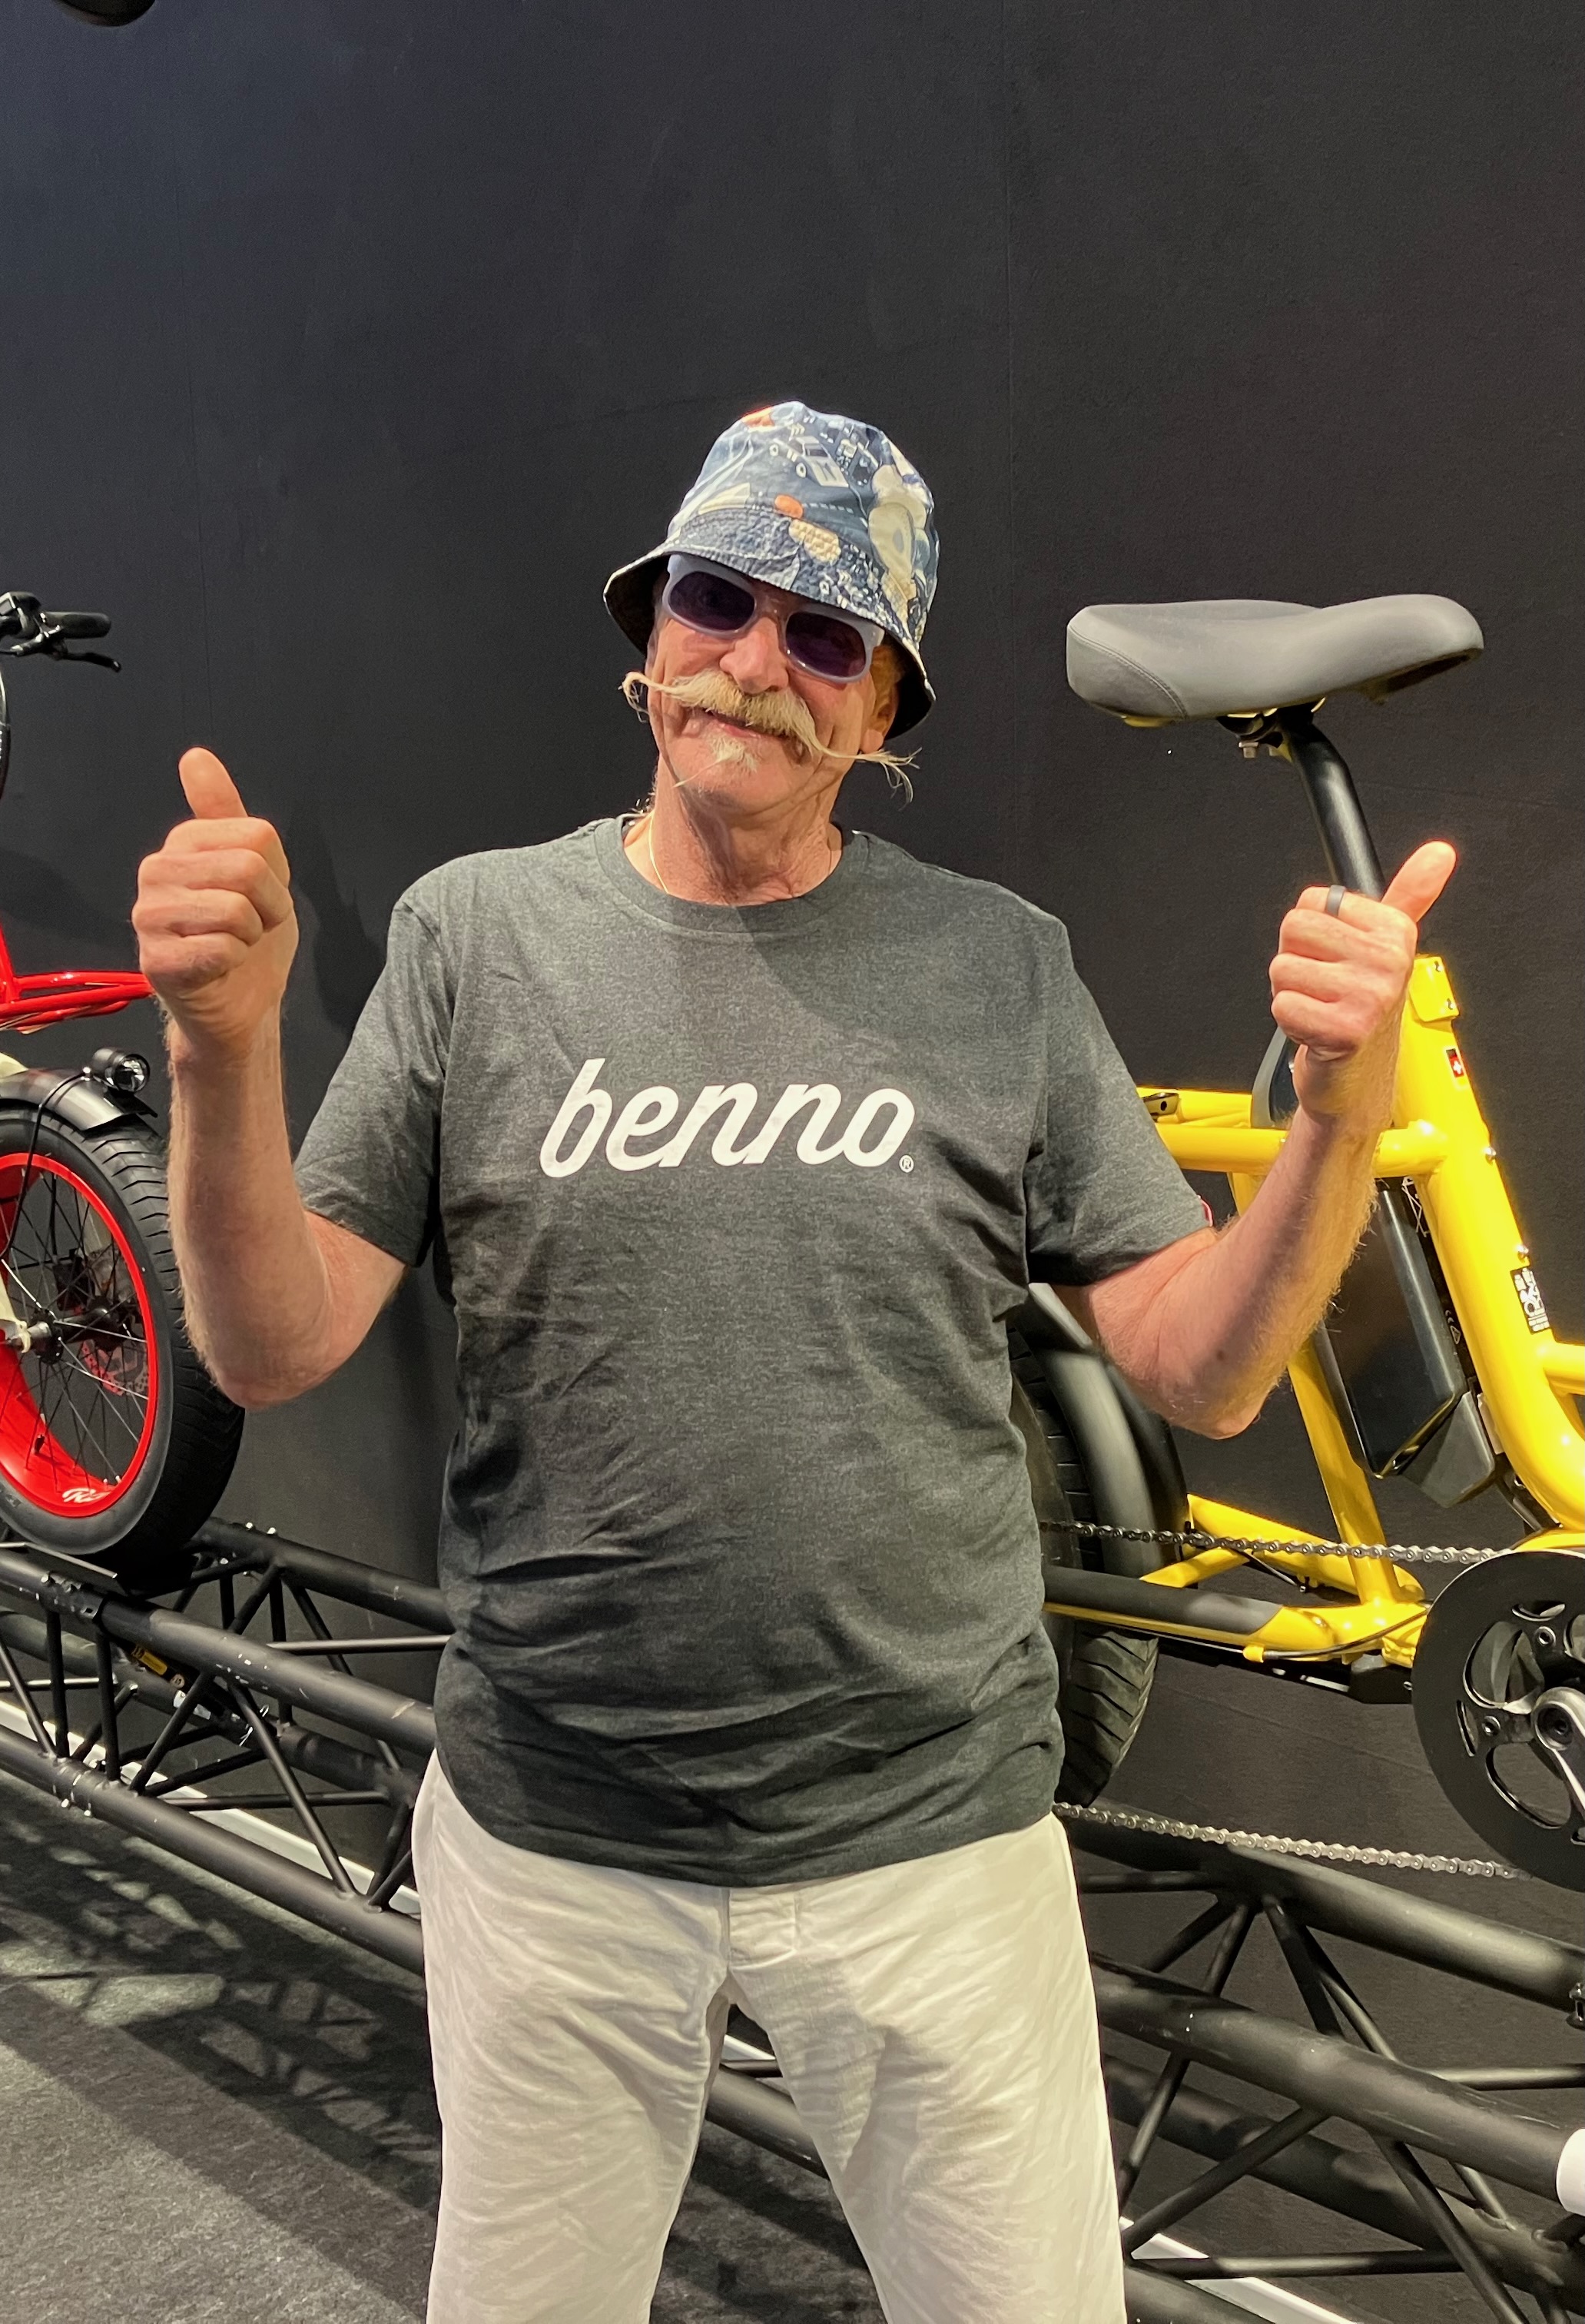 No longer with Trek, Gary Fisher is having fun being Gary Fisher at Eurobike | Bicycle Retailer and Industry News